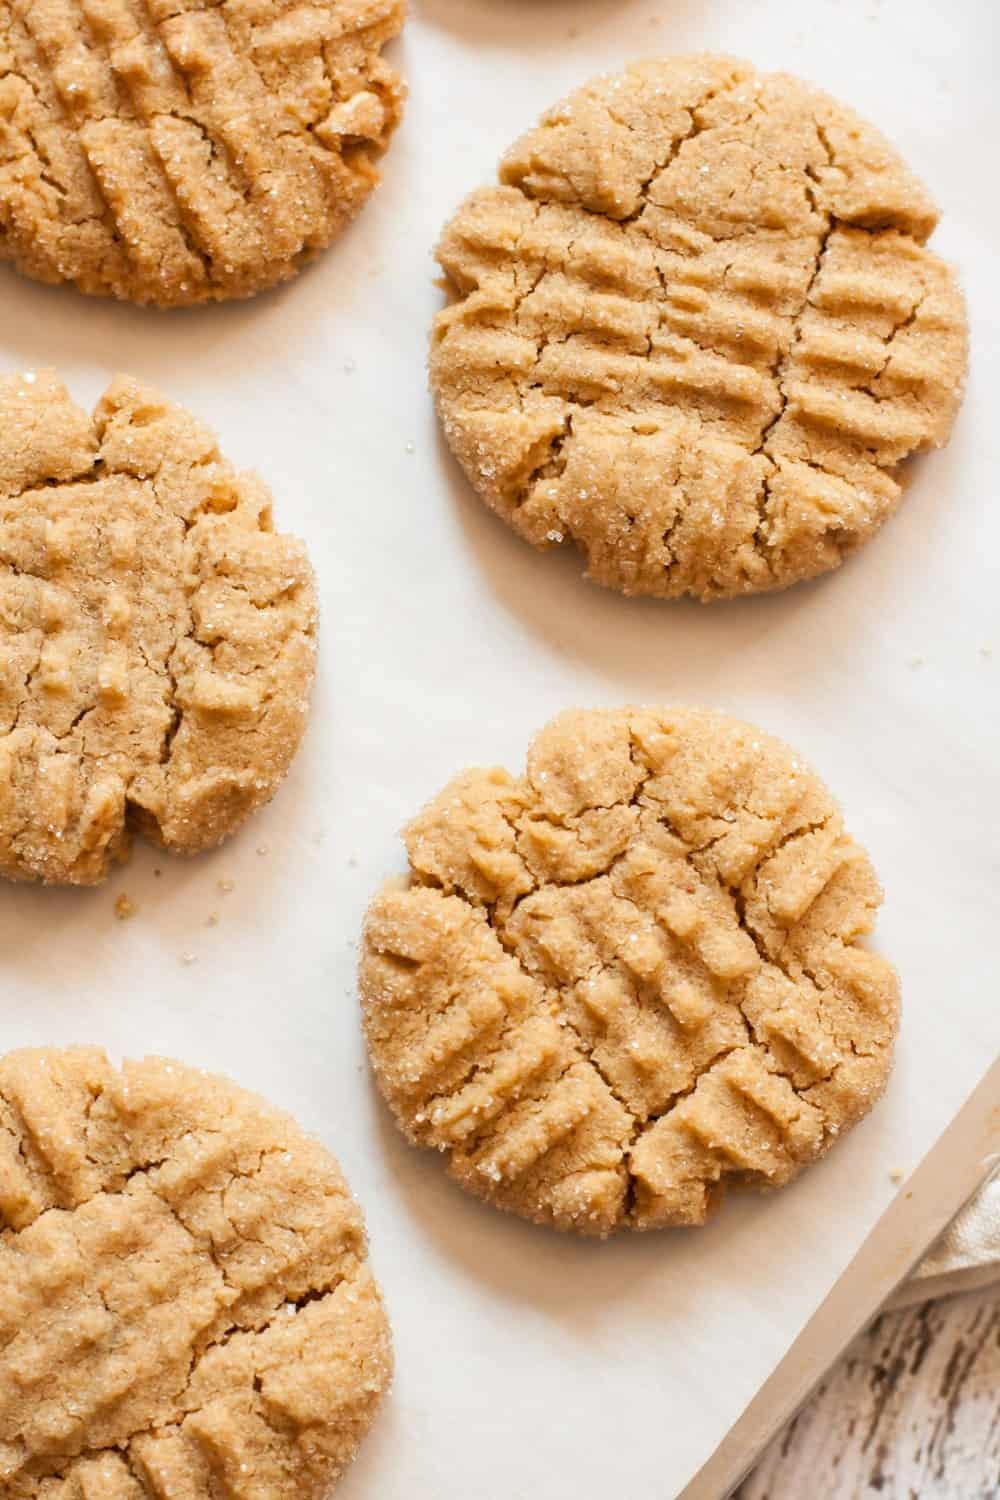 Plant-based peanut butter cookies